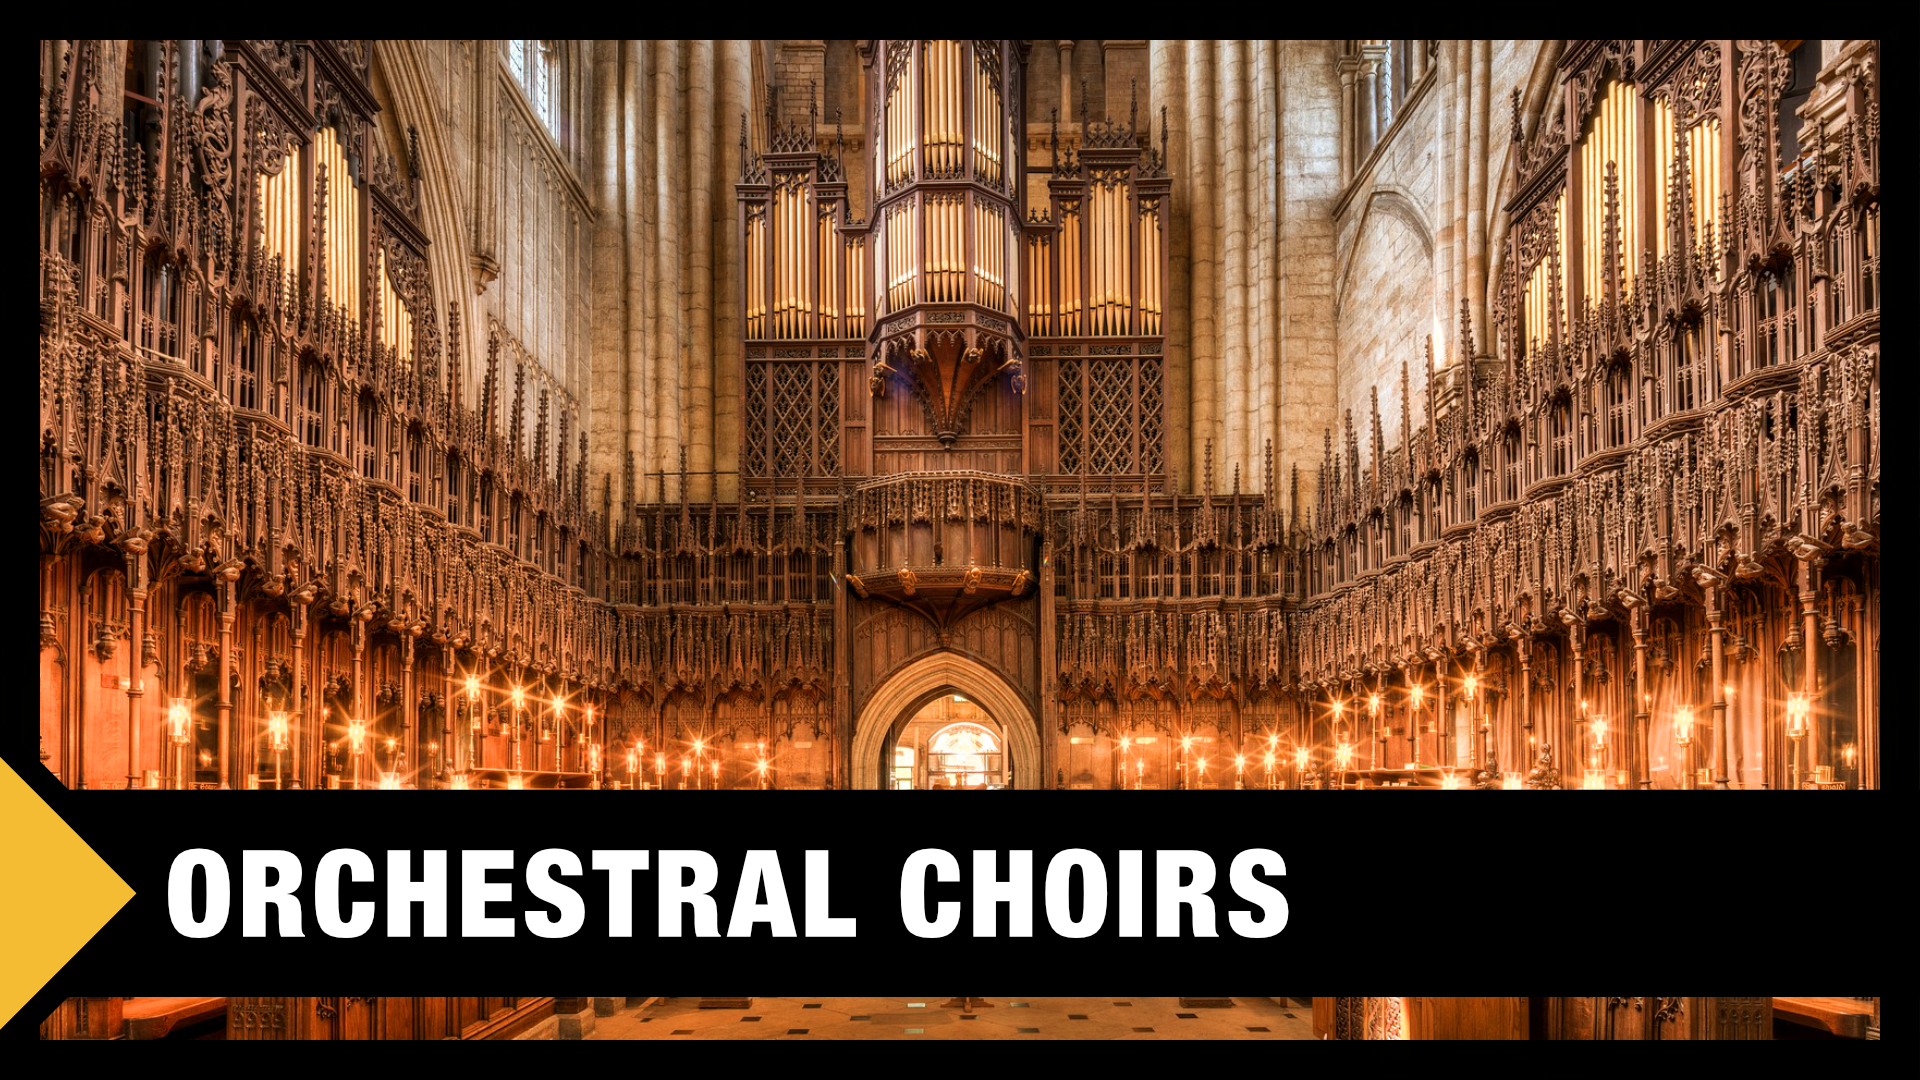 east west symphonic choirs free download